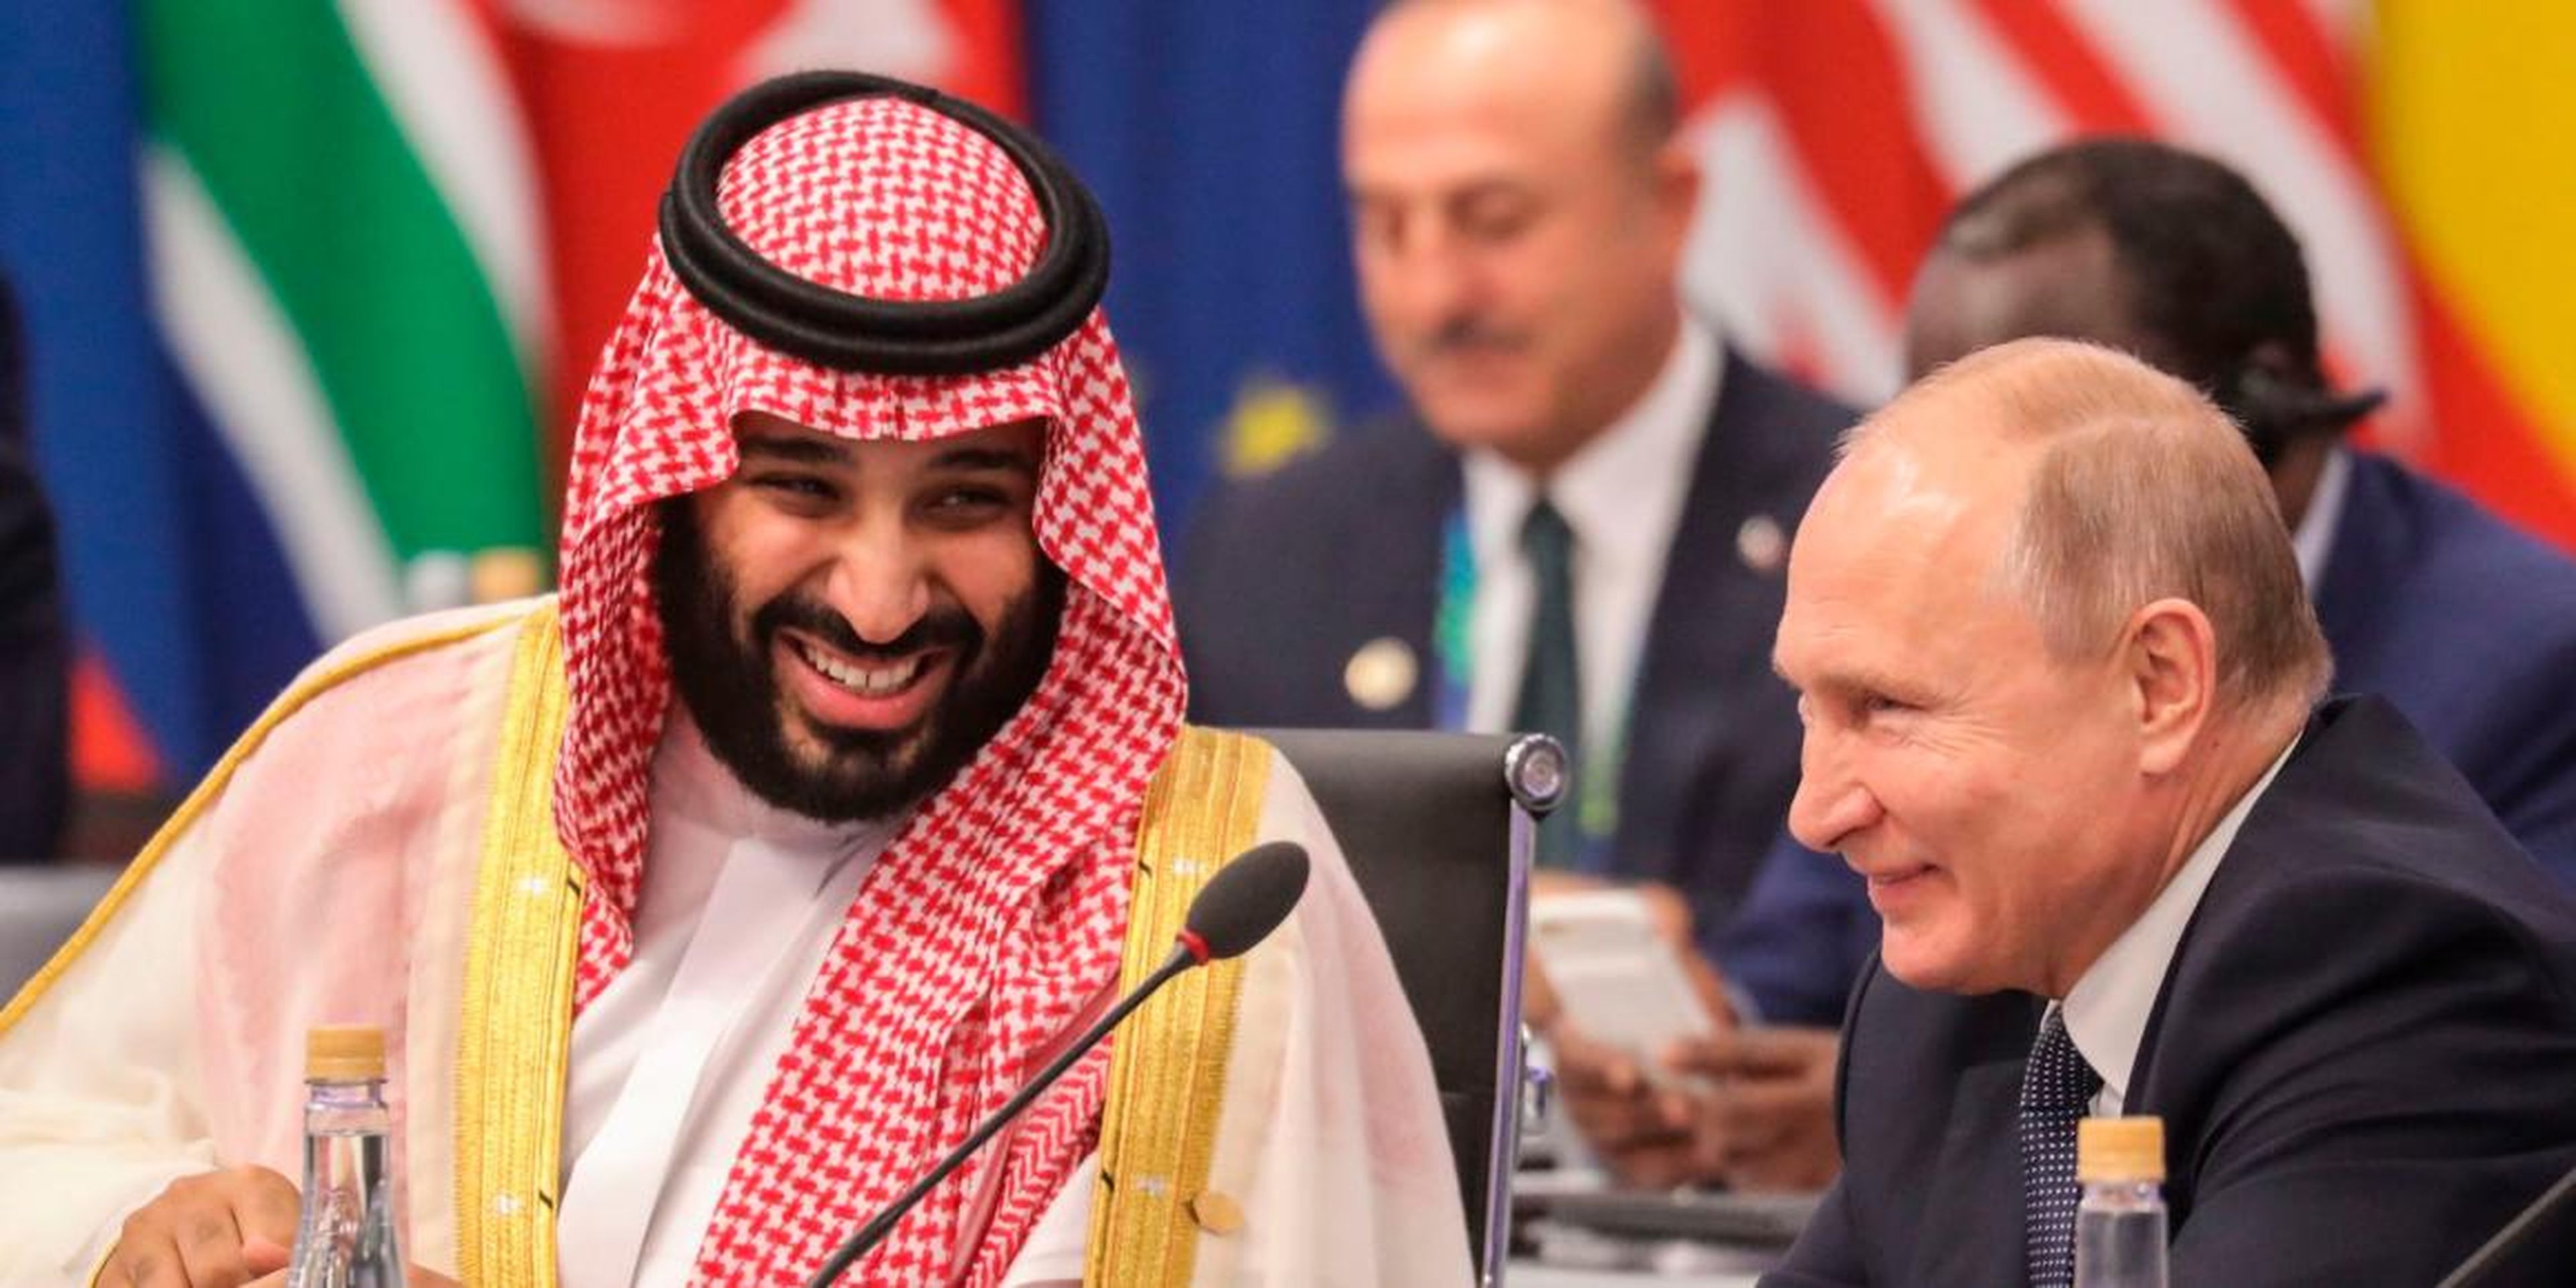 Russia's President Vladimir Putin and Saudi Arabia's Crown Prince Mohammed bin Salman attend the G20 Leaders' Summit in Buenos Aires in November 2018.